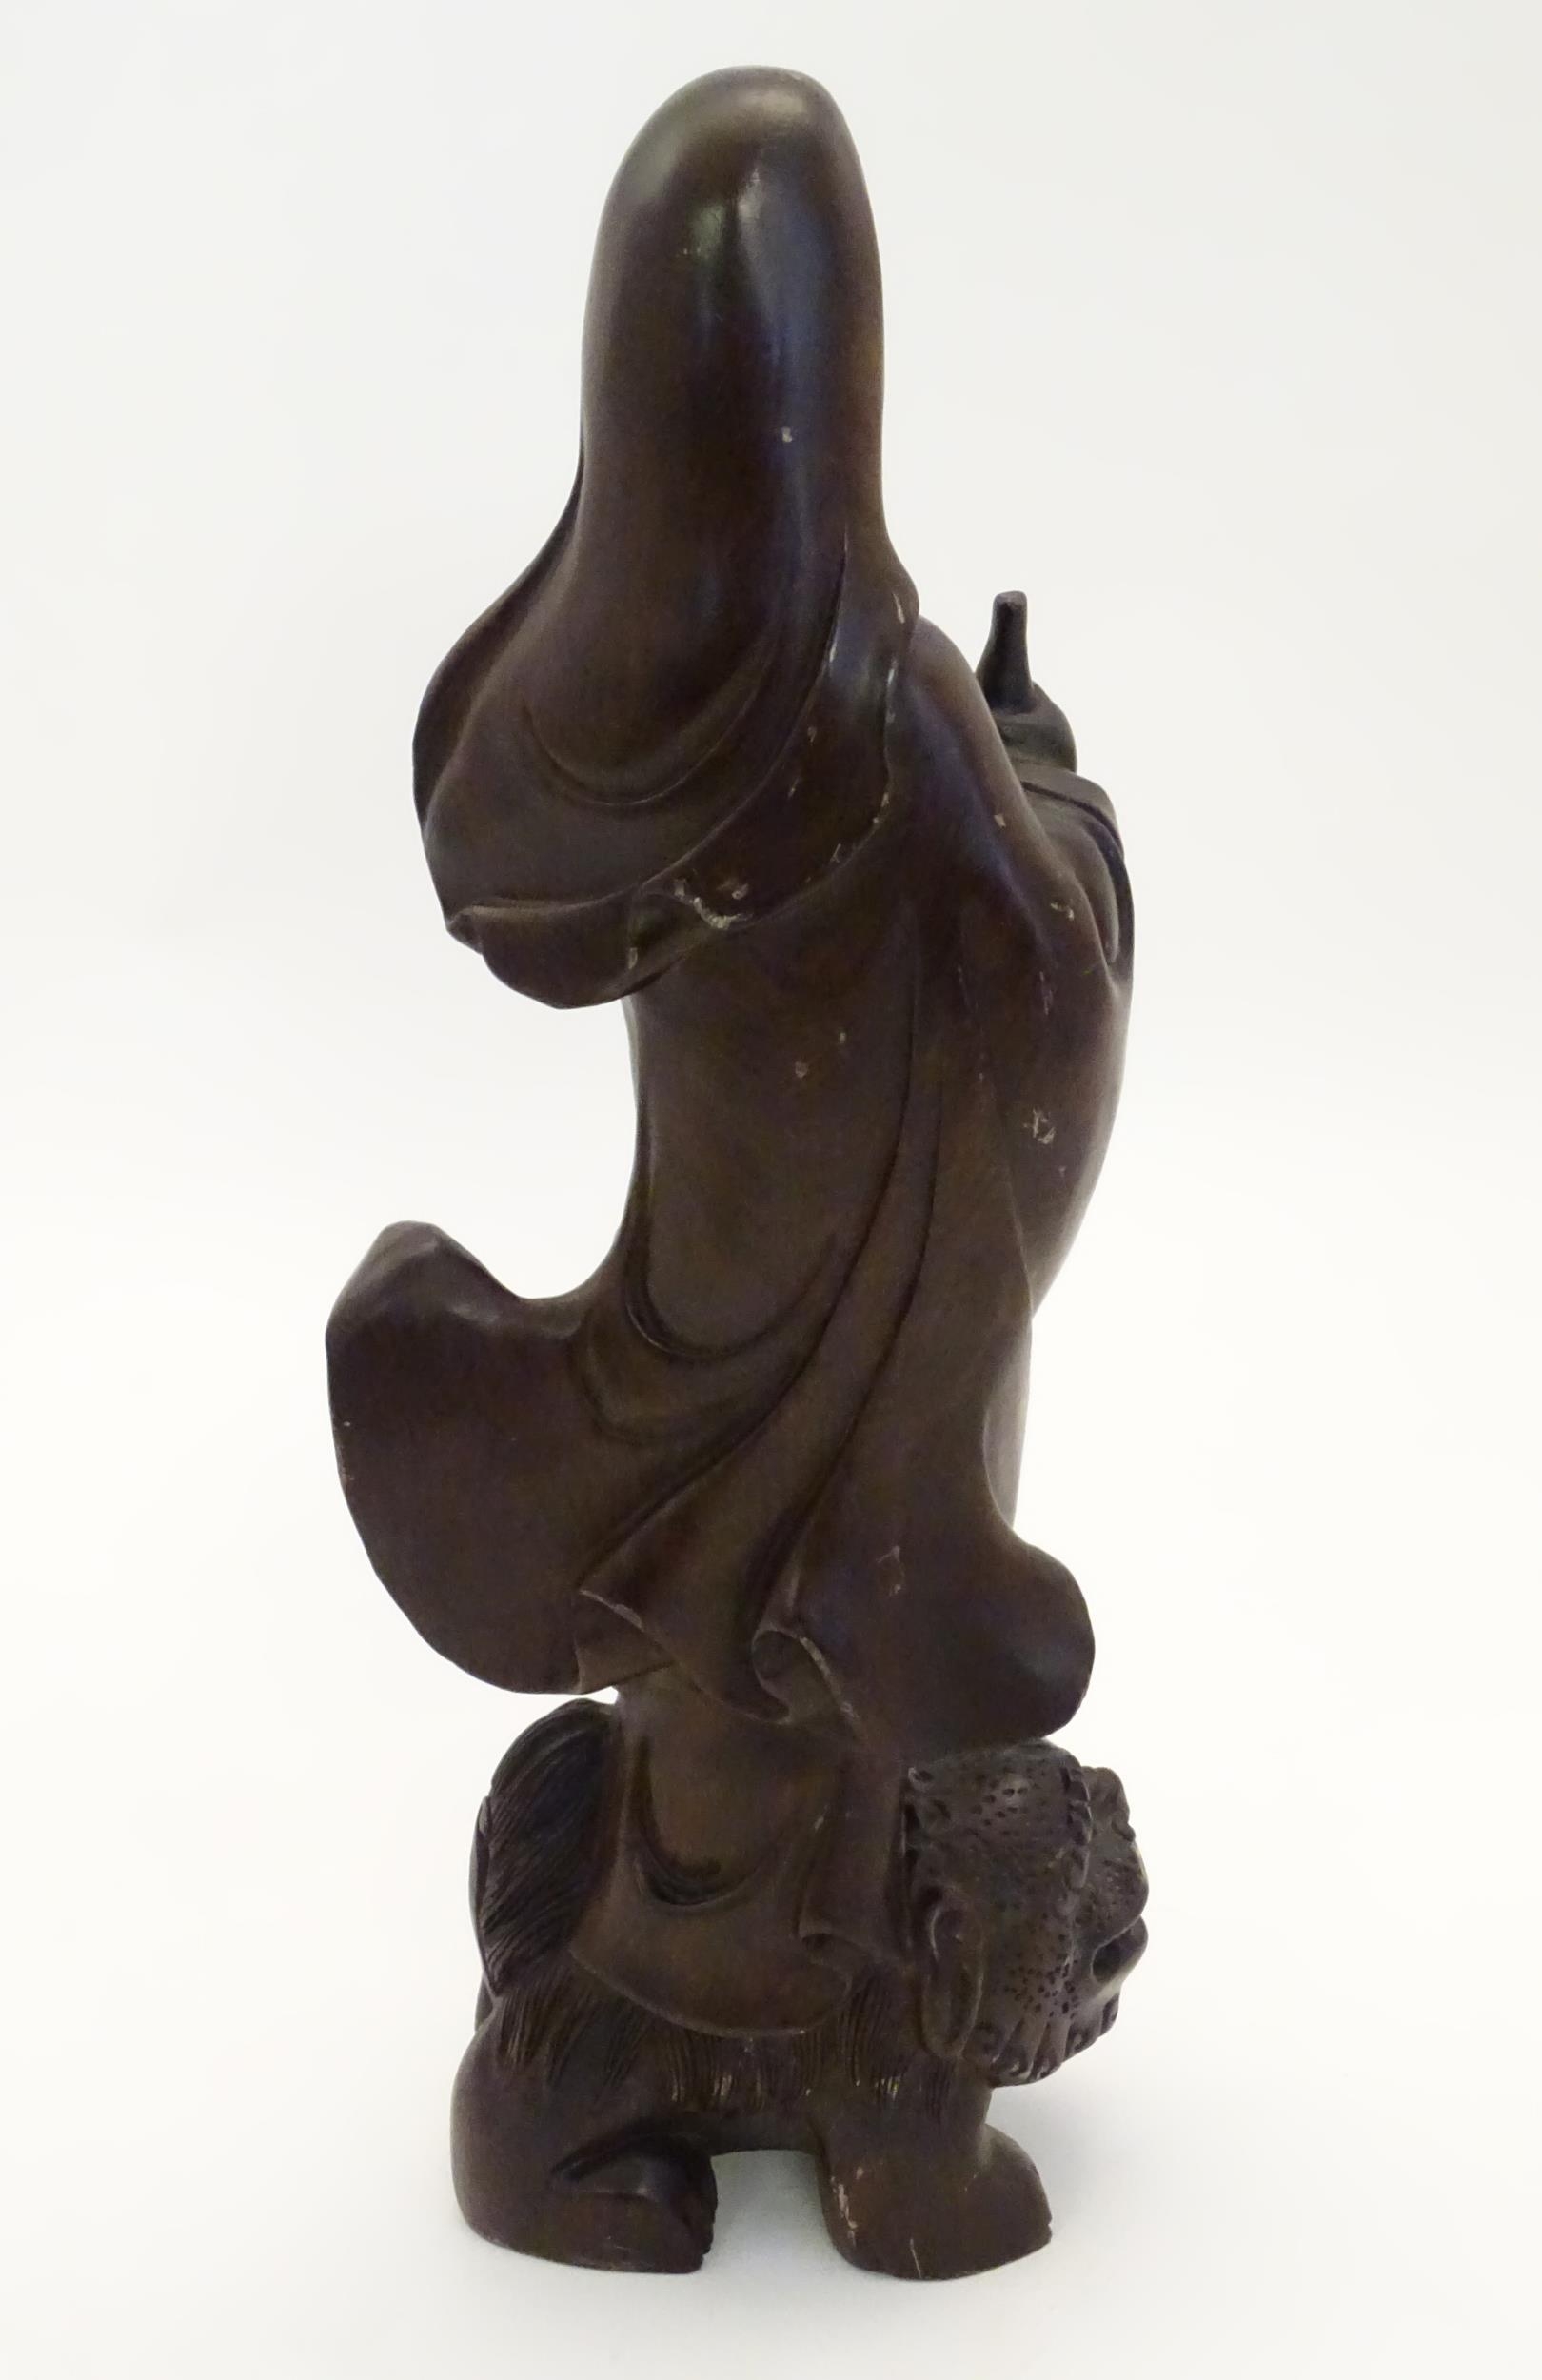 A Chinese carved hardwood model of Guanyin, Bodhisattva of Compassion, holding a bottle and standing - Image 5 of 6